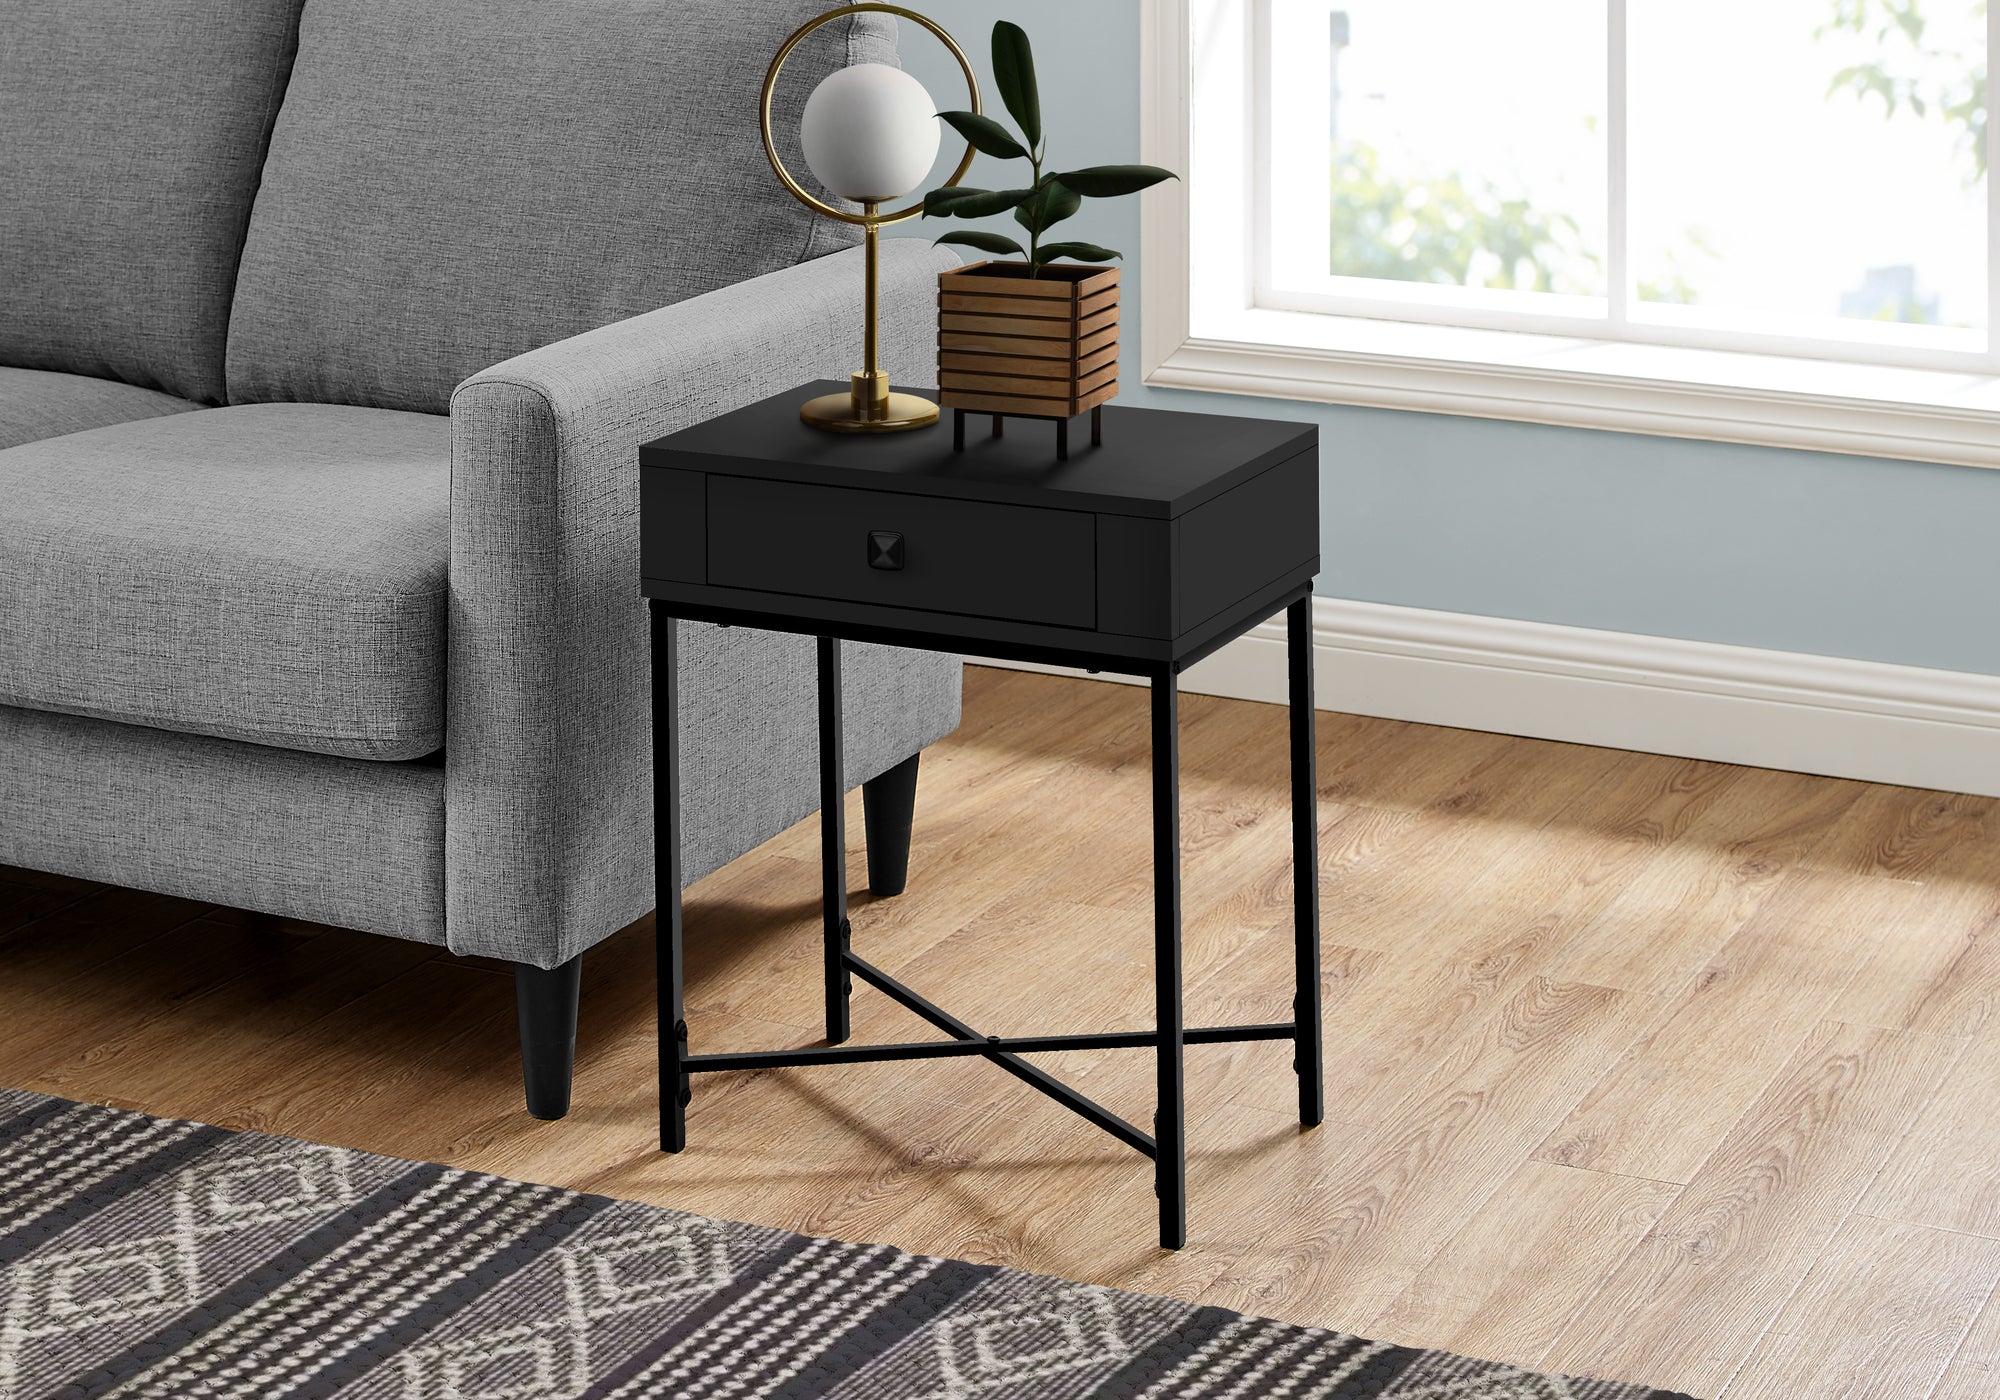 I 3542 - ACCENT TABLE - 22"H / BLACK / BLACK METAL BY MONARCH SPECIALTIES INC